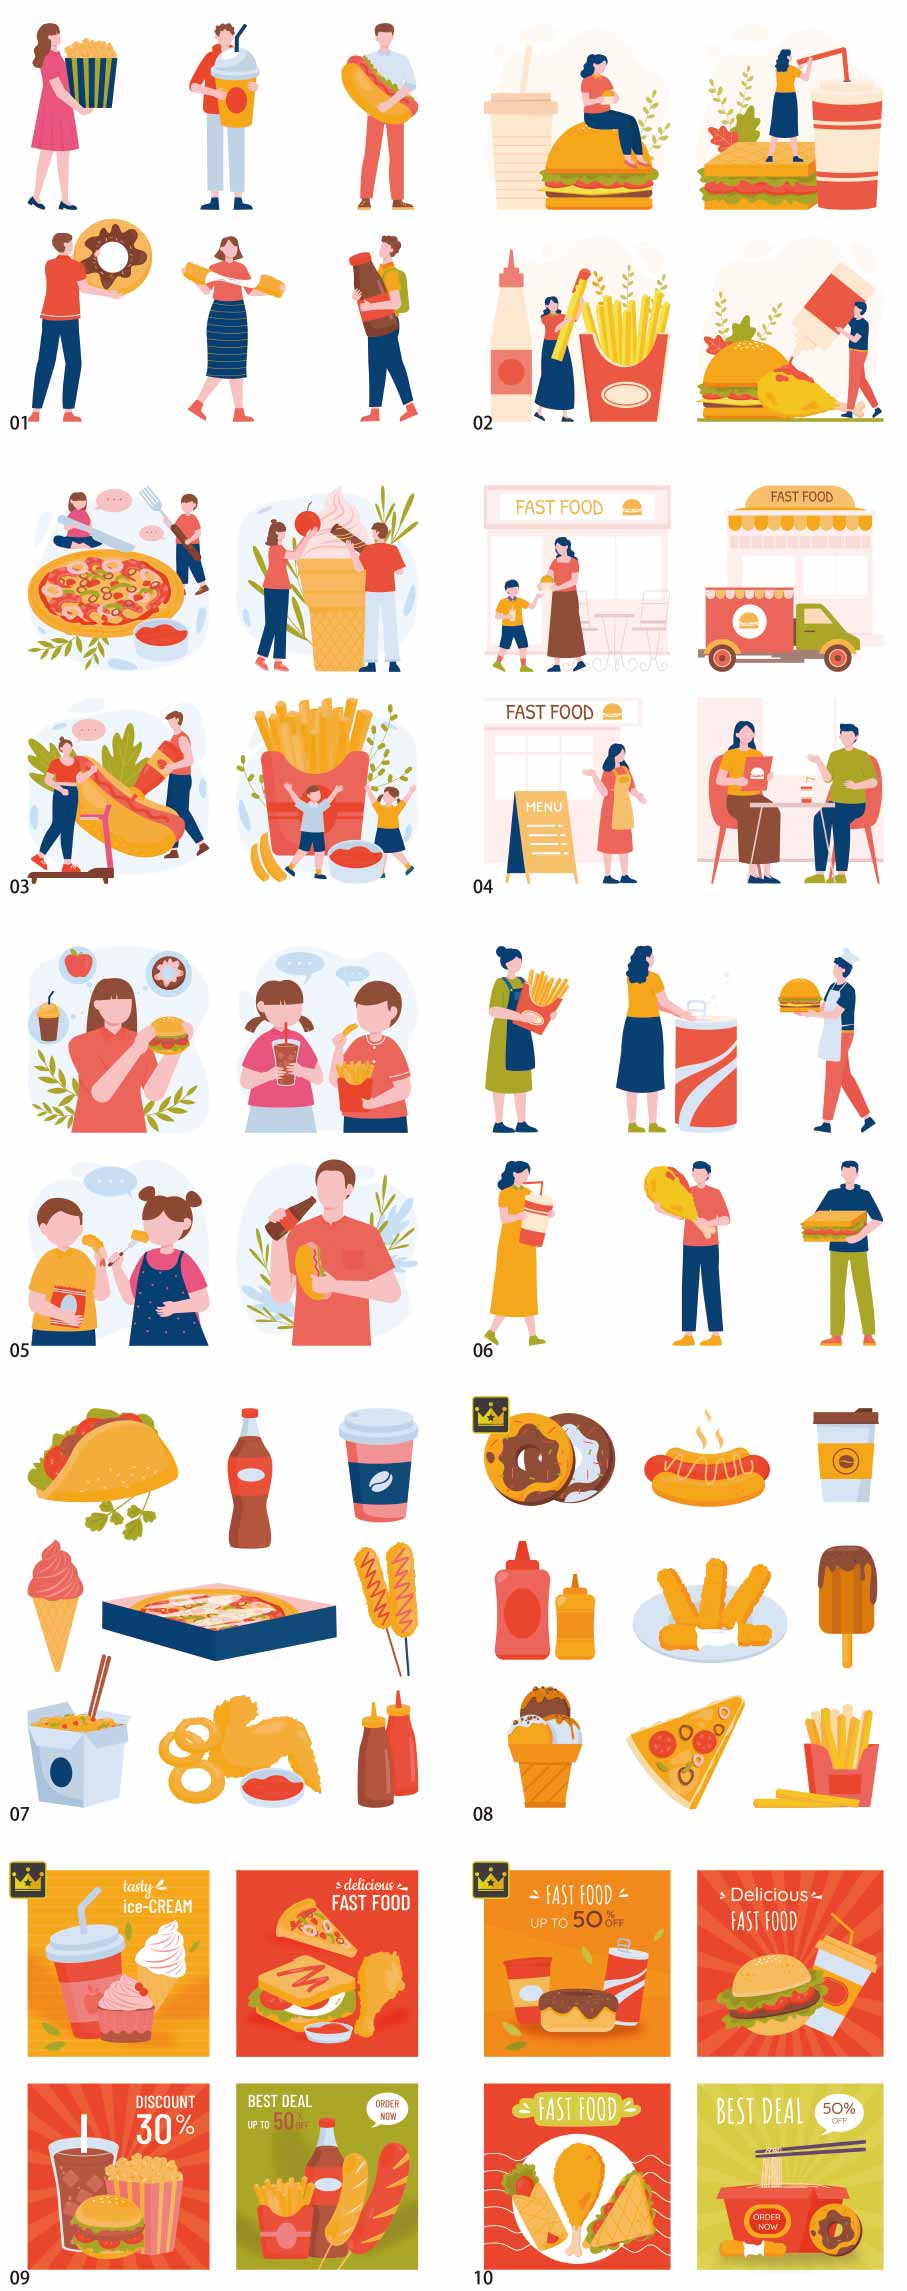 Fast food illustration collection